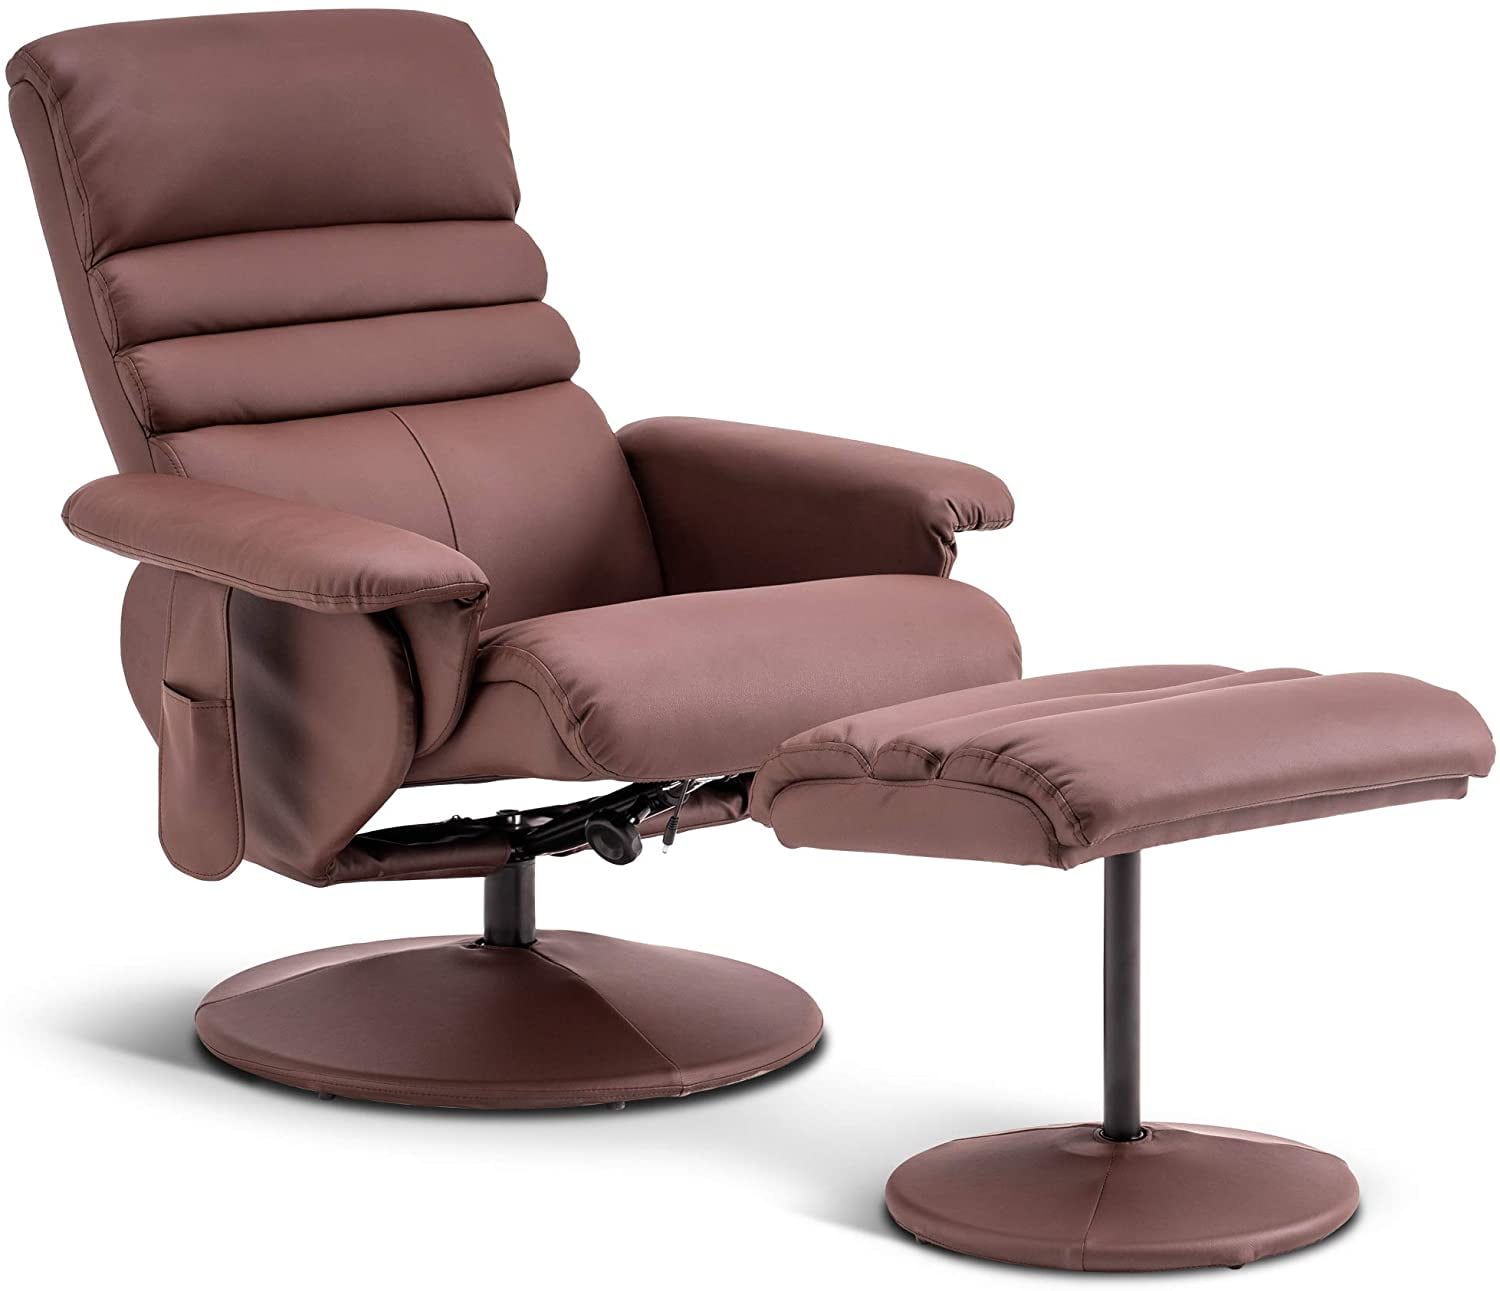 Mcombo Recliner With Ottoman Reclining, Dark Brown Leather Reclining Armchair